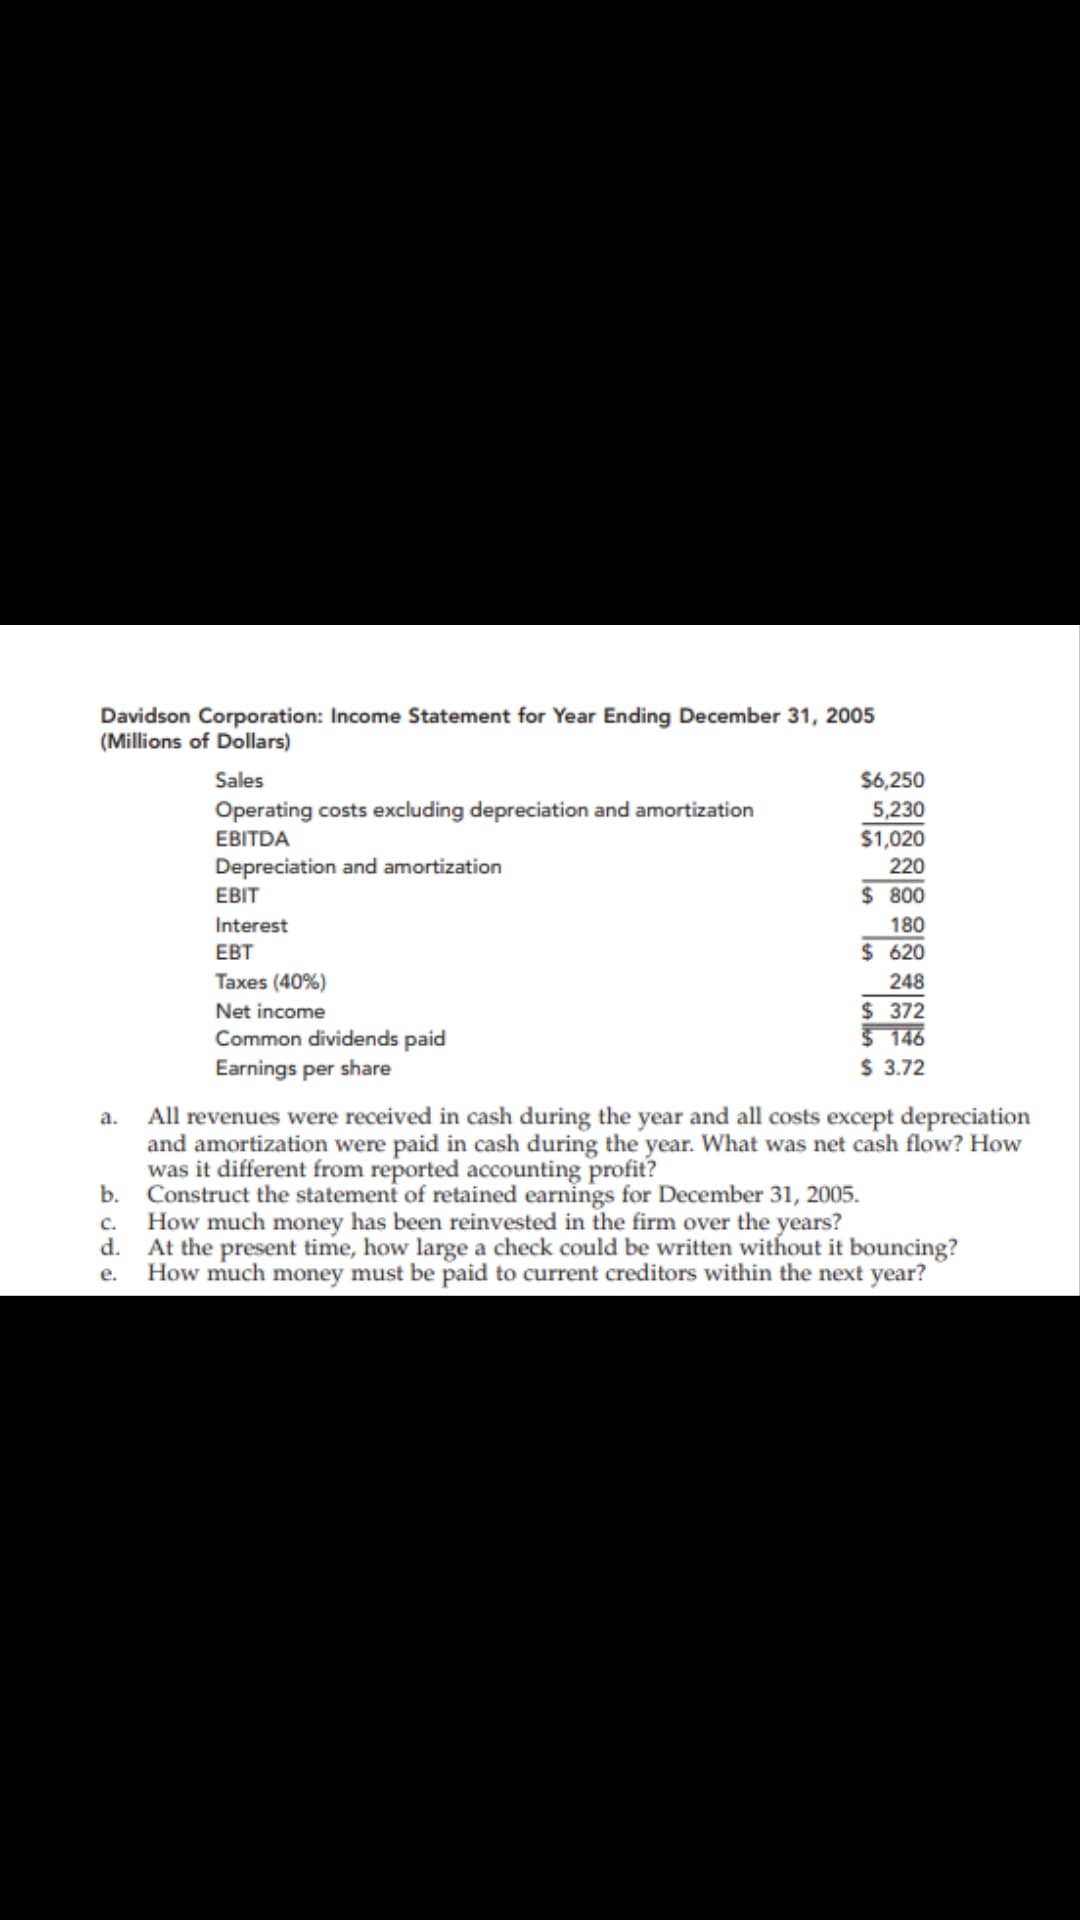 Davidson Corporation: Income Statement for Year Ending December 31, 2005
(Millions of Dollars)
Sales
$6,250
Operating costs excluding depreciation and amortization
5,230
ЕBITDA
$1,020
Depreciation and amortization
220
EBIT
$ 800
Interest
180
EBT
$ 620
Taxes (40%)
248
$ 372
$ 146
$ 3.72
Net income
Common dividends paid
Earnings per share
All revenues were received in cash during the year and all costs except depreciation
and amortization were paid in cash during the year. What was net cash flow? How
was it different from reported accounting profit?
b. Construct the statement of retained earnings for December 31, 2005.
c. How much money has been reinvested in the firm over the years?
d. At the present time, how large a check could be written without it bouncing?
e. How much money must be paid to current creditors within the next year?
а.
